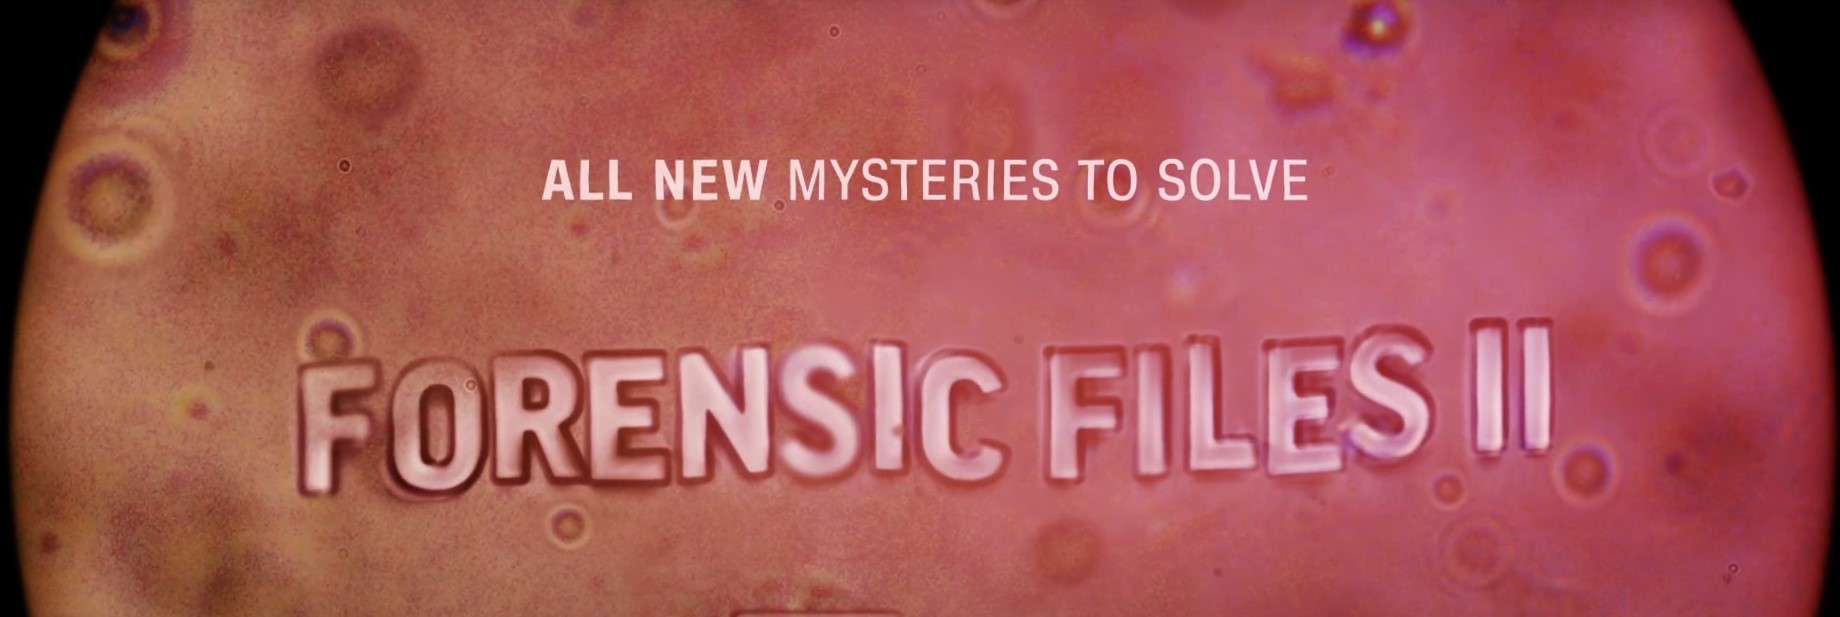 Forensic Files Streaming Guide